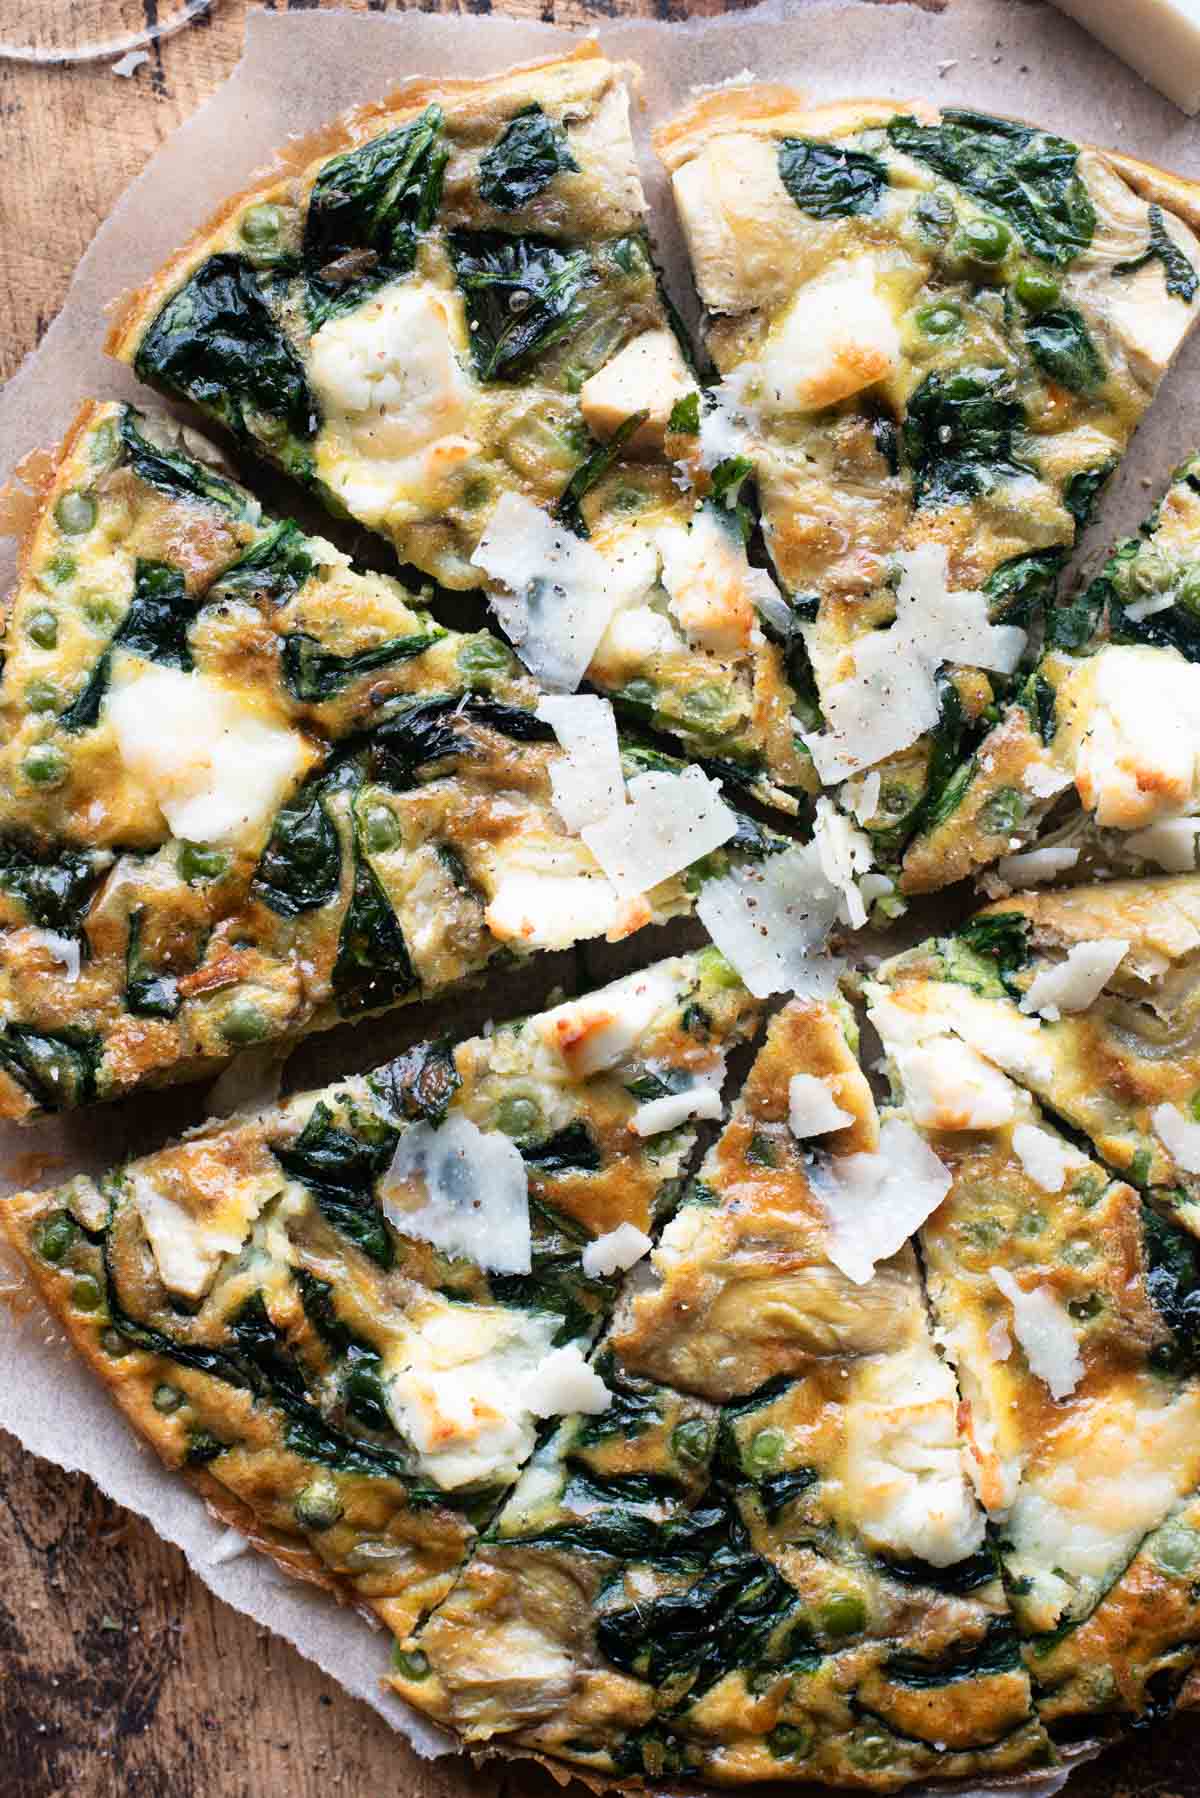 An overhead shot of a spinach and artichoke frittata cut into slices sitting on a wooden cutting board.